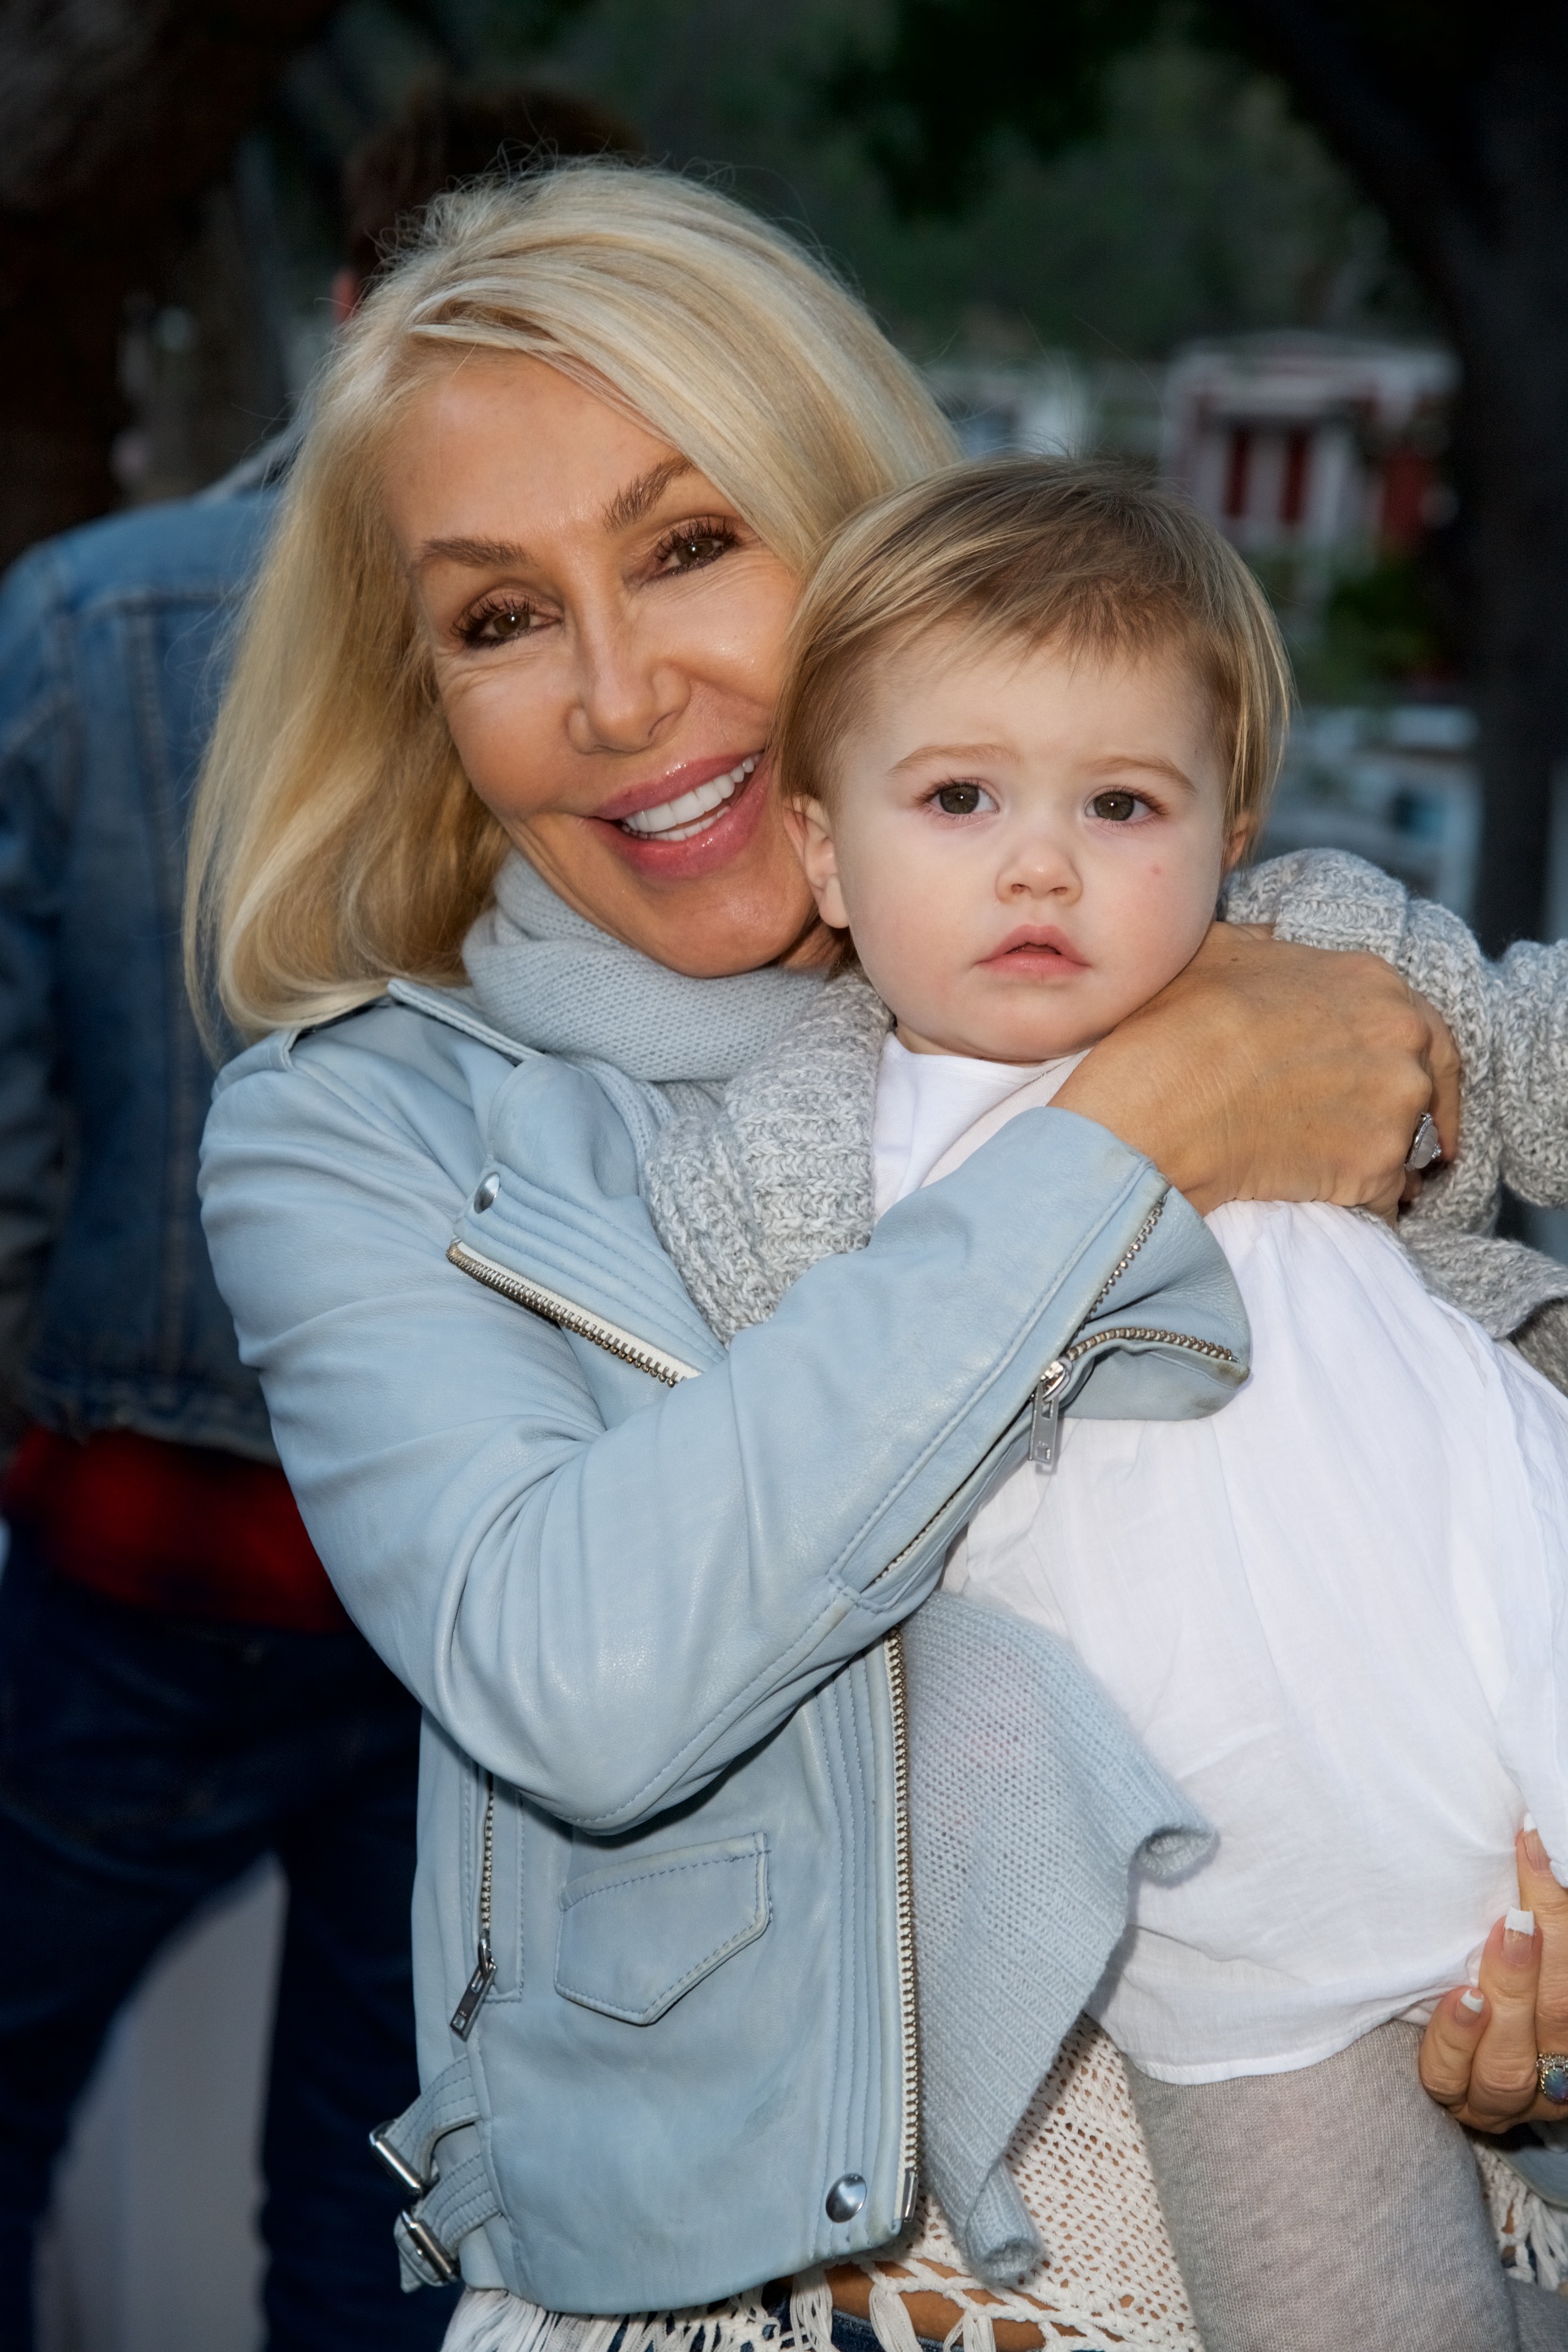 Linda Thompson with her granddaughter Eva James Jenner at Brandon Jenner's "Burning Ground" release party in Malibu, 2016 | Source: Getty Images